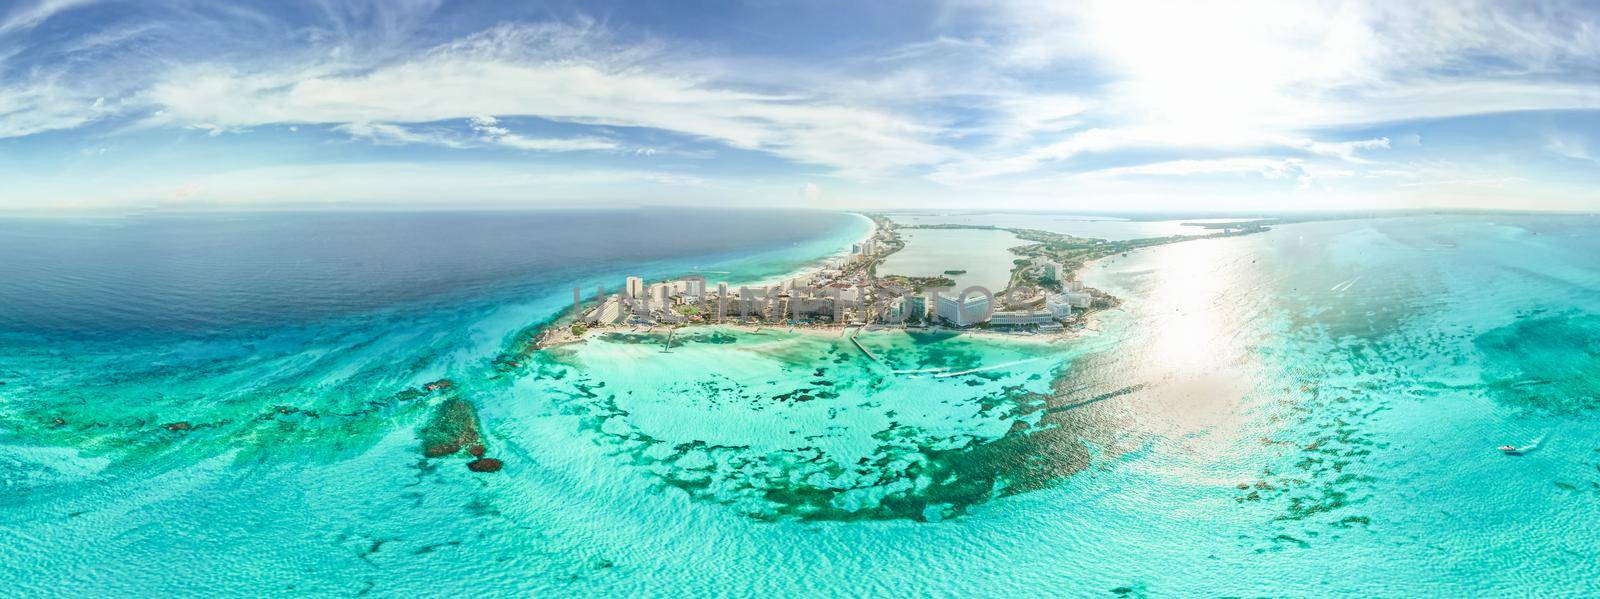 Aerial 360 panoramic view of Cancun city hotel zone in Mexico. Caribbean coast landscape of Mexican resort with beach Playa Caracol and Kukulcan road. Riviera Maya in Quintana roo region on Yucatan Peninsula